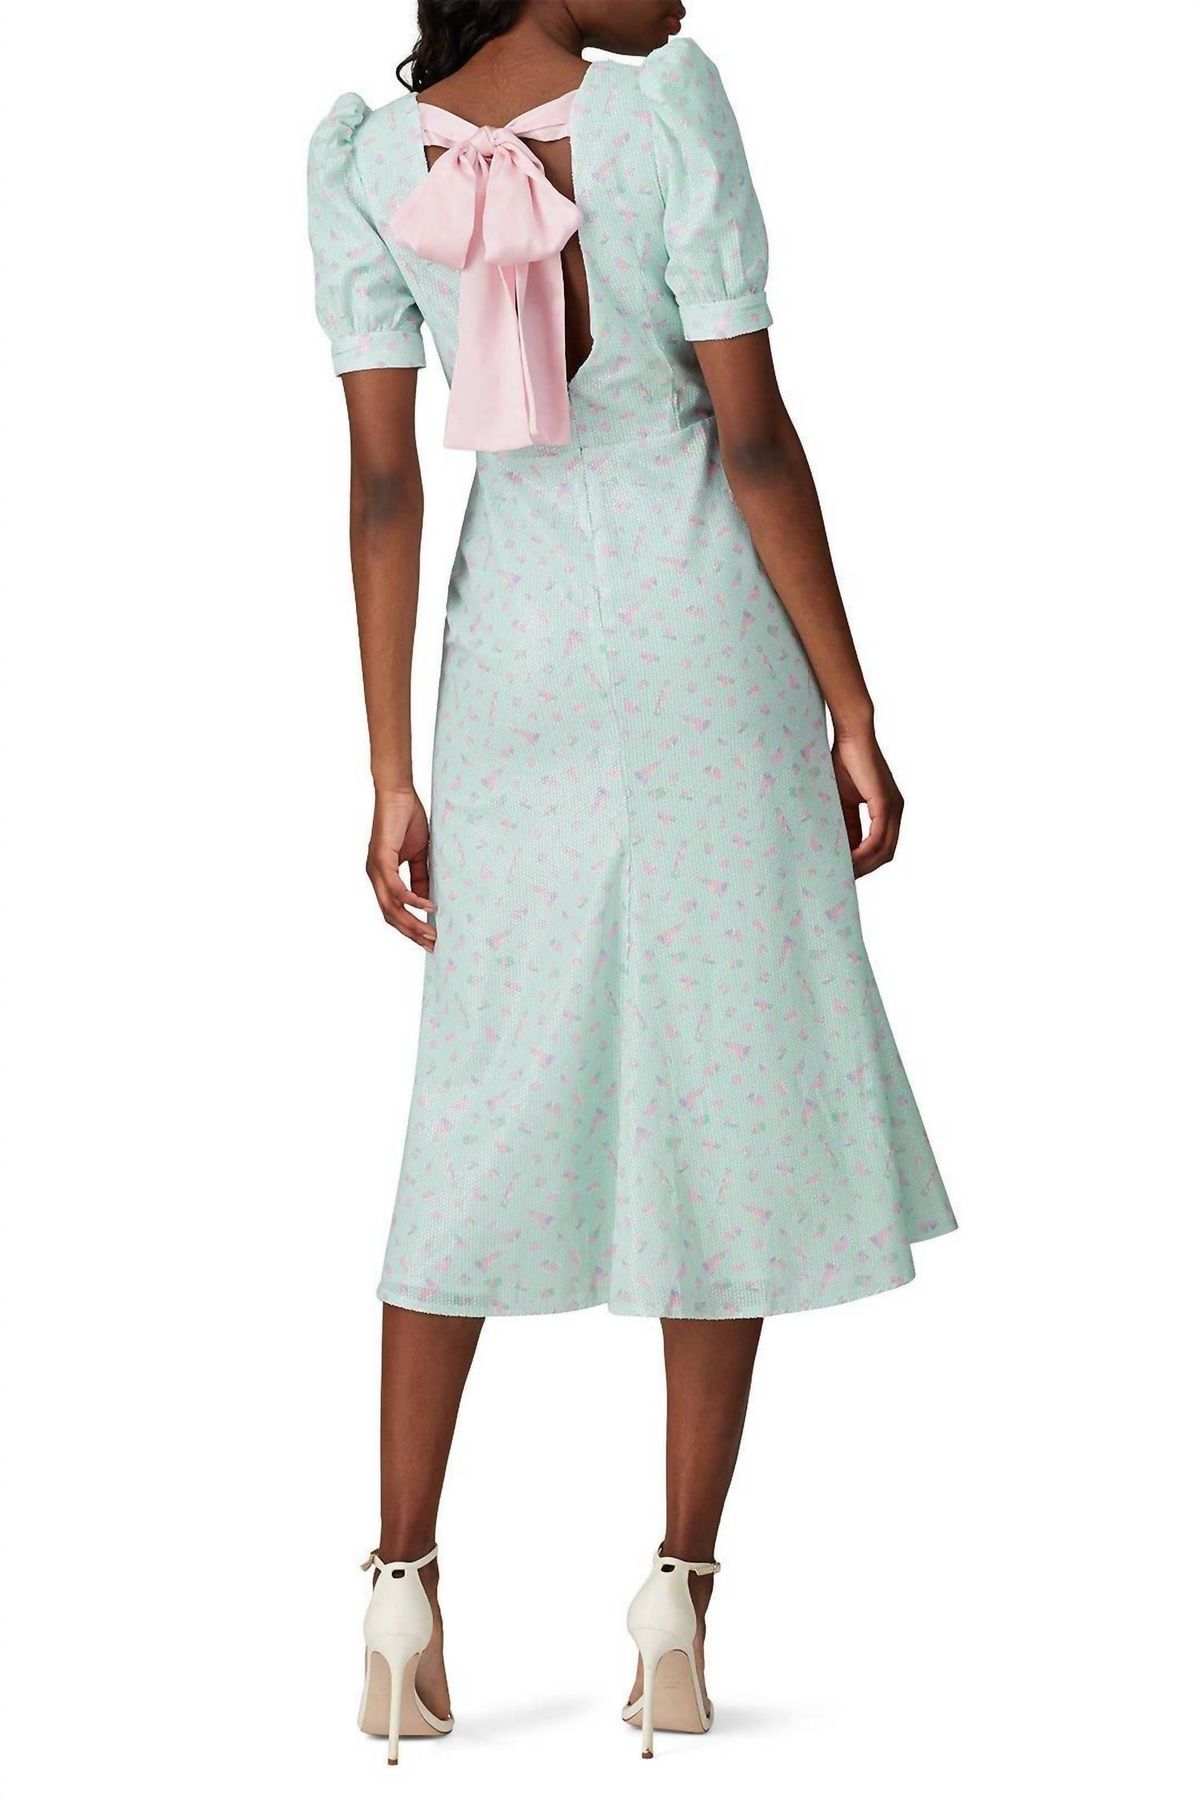 Style 1-1819459701-5648-1 Olivia Rubin Size 8 Light Green Cocktail Dress on Queenly